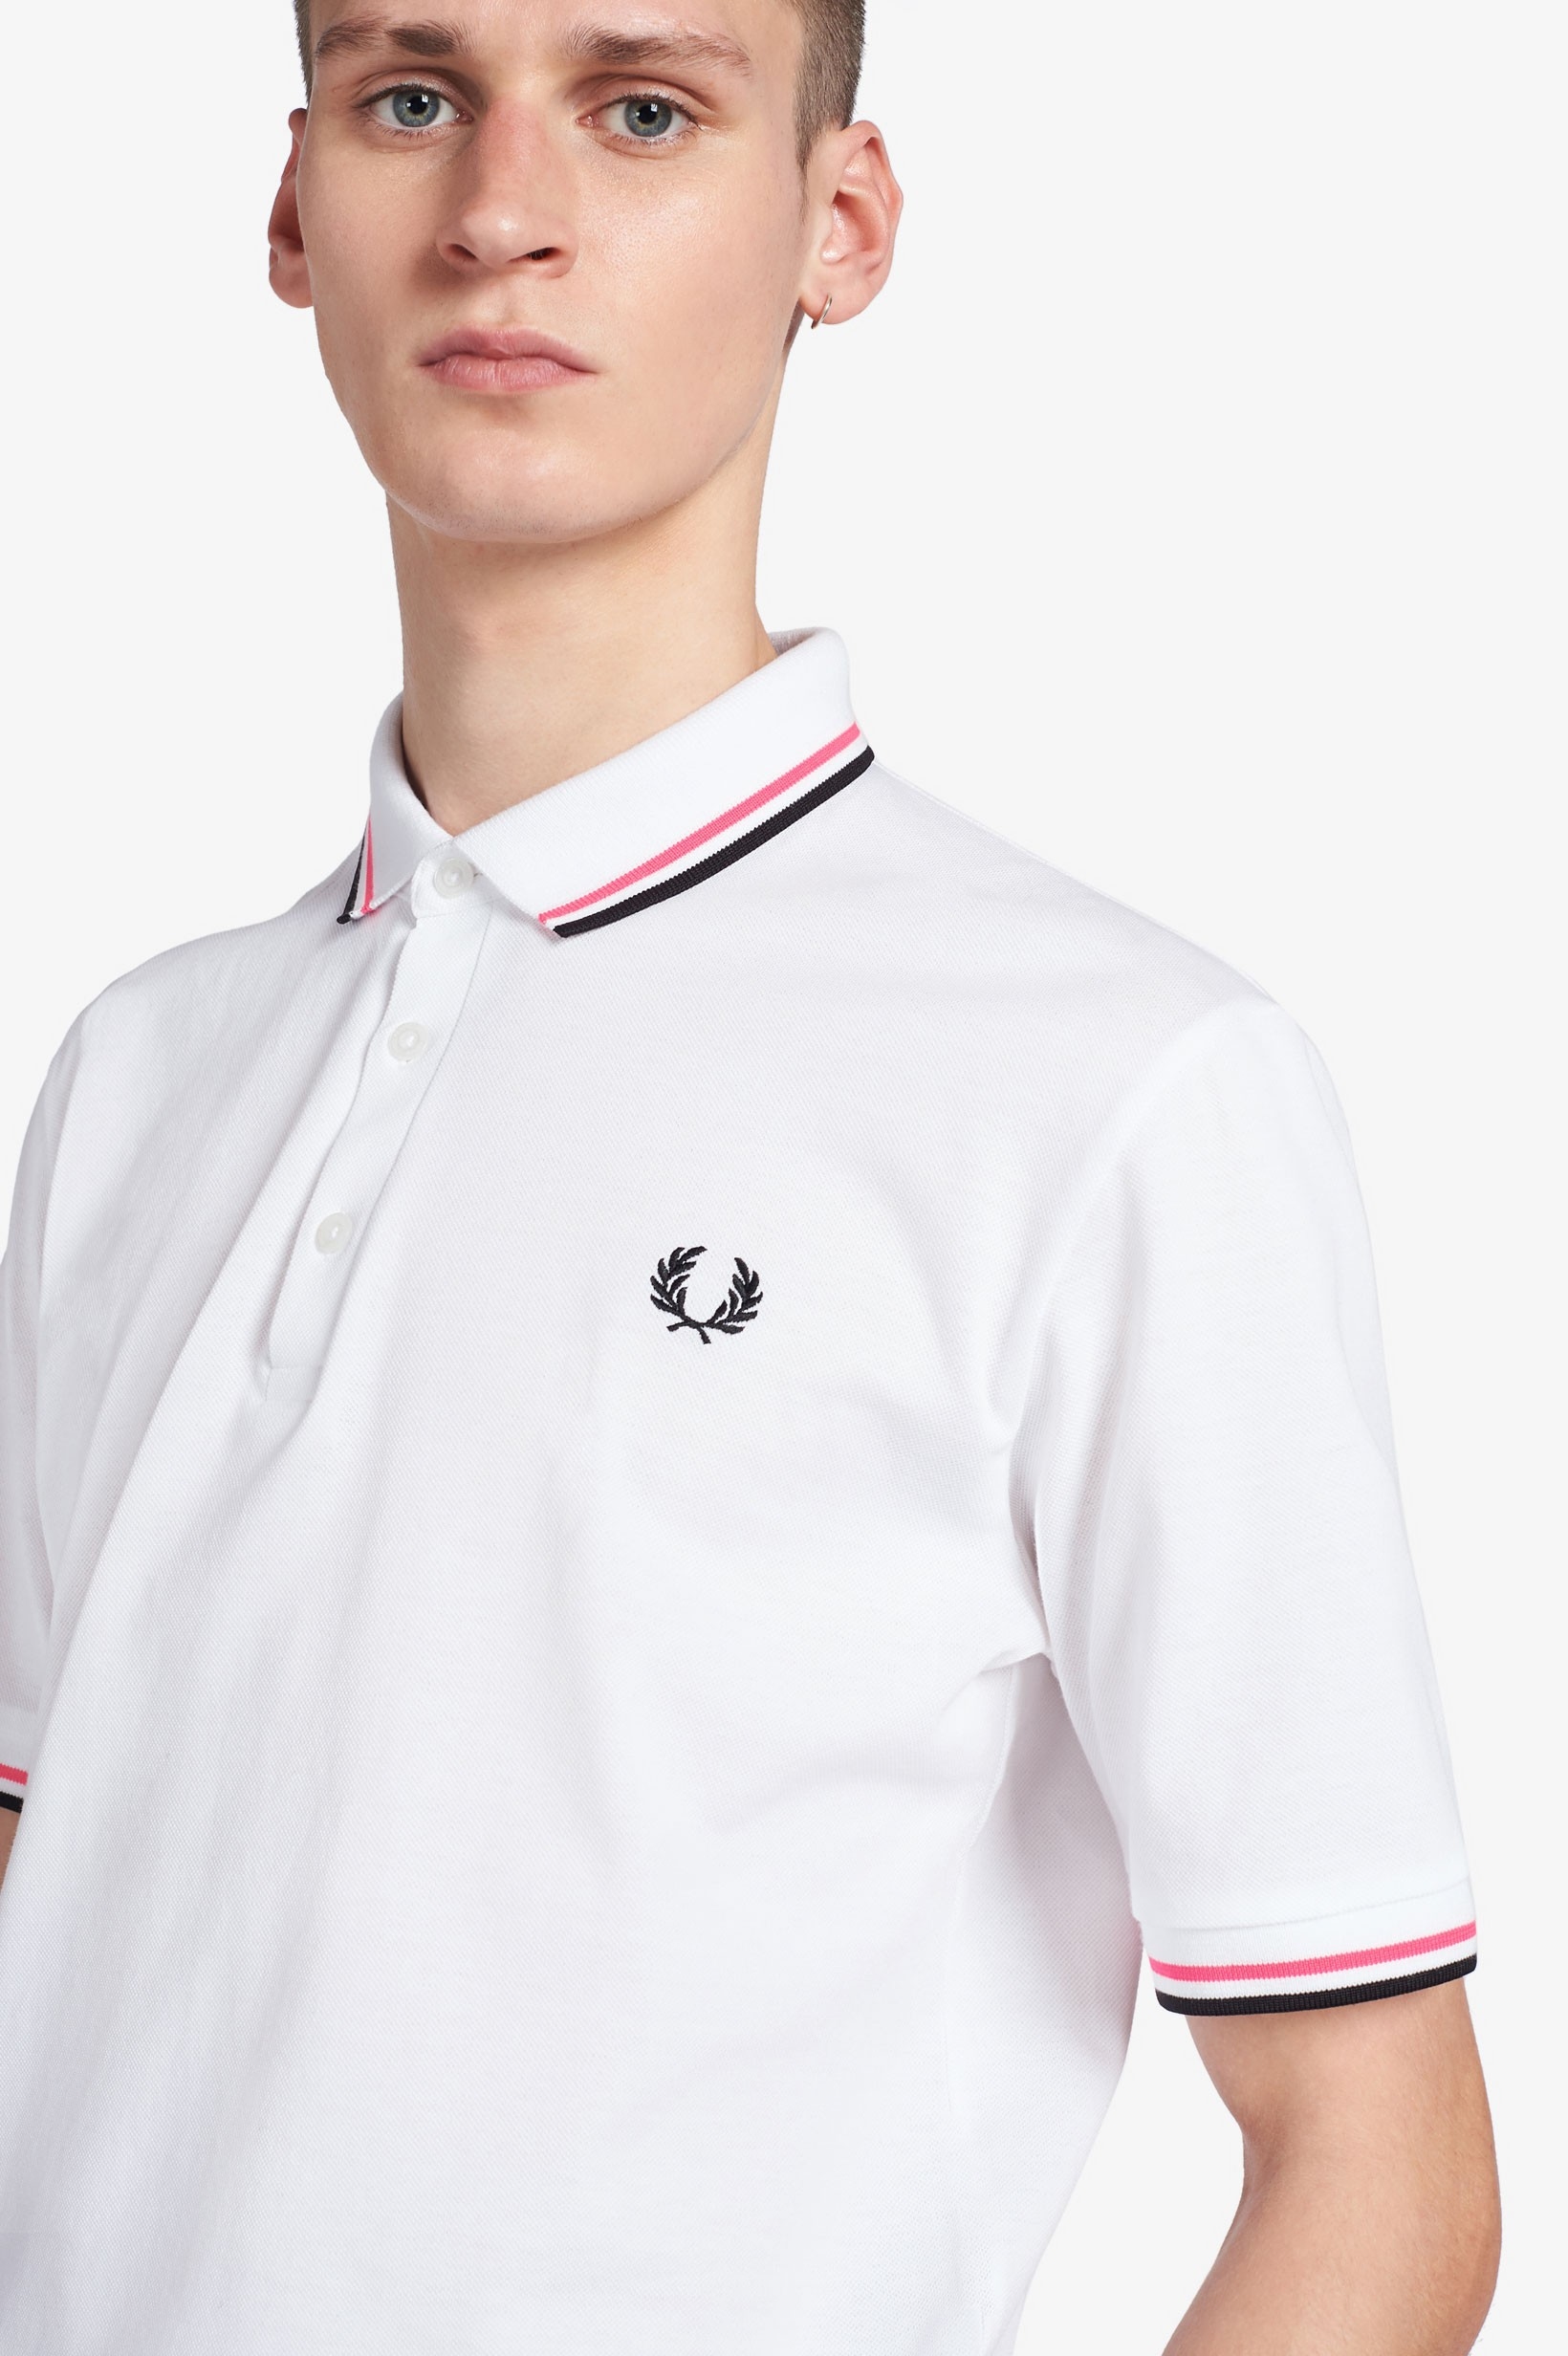 Fred Perry 經典日本製 M102 Polo 衫 - 白